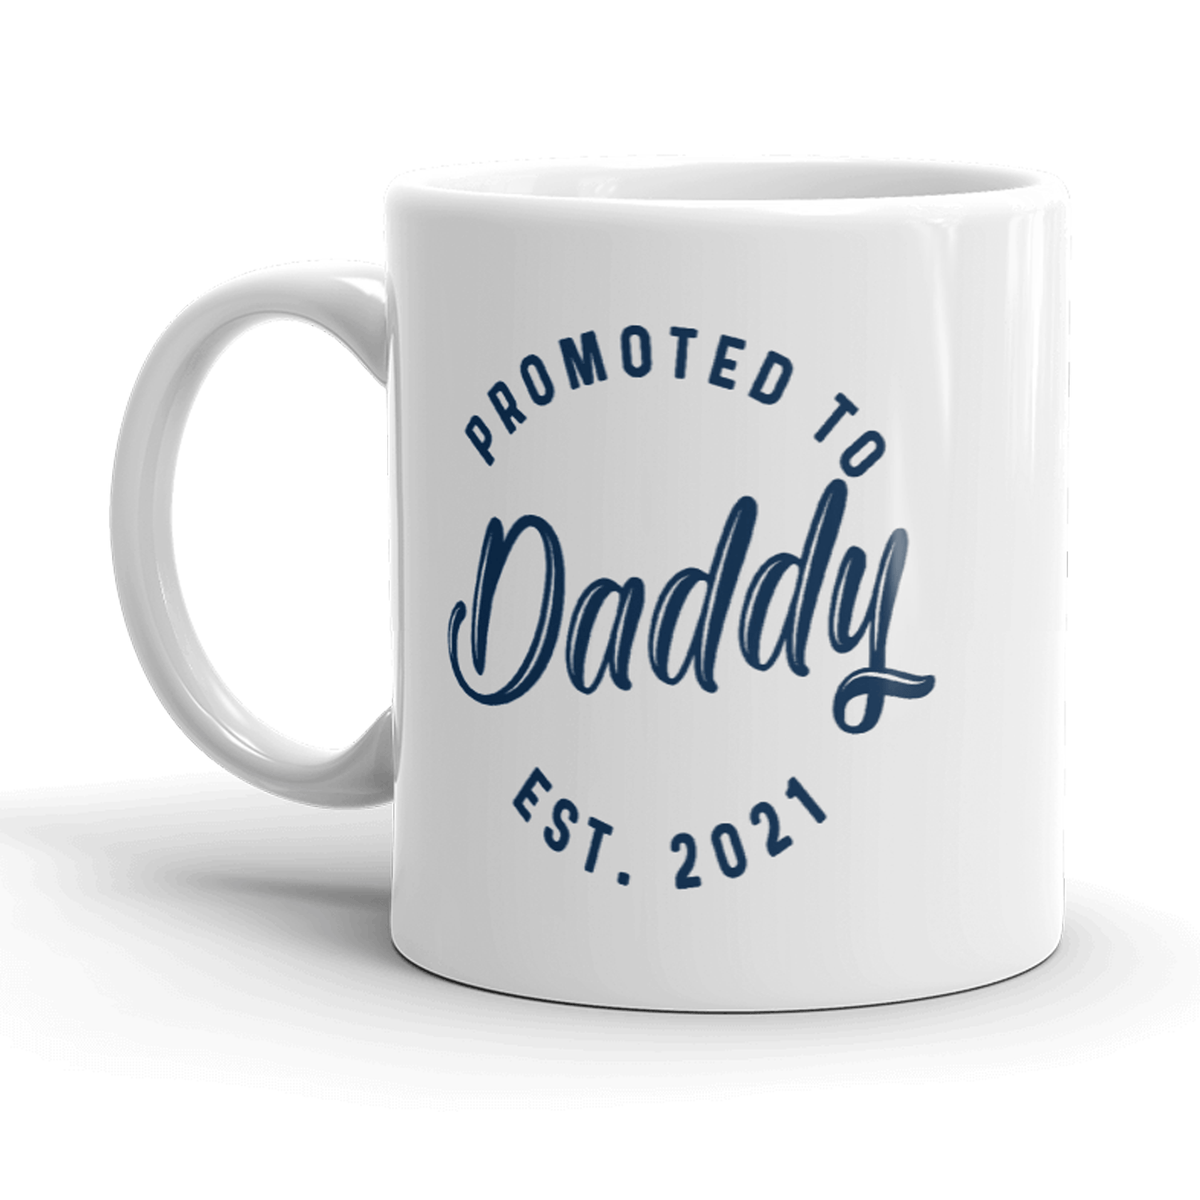 Promoted To Daddy 2021 Mug Funny New Baby Family Graphic Coffee Cup-11oz - Crazy Dog T-Shirts